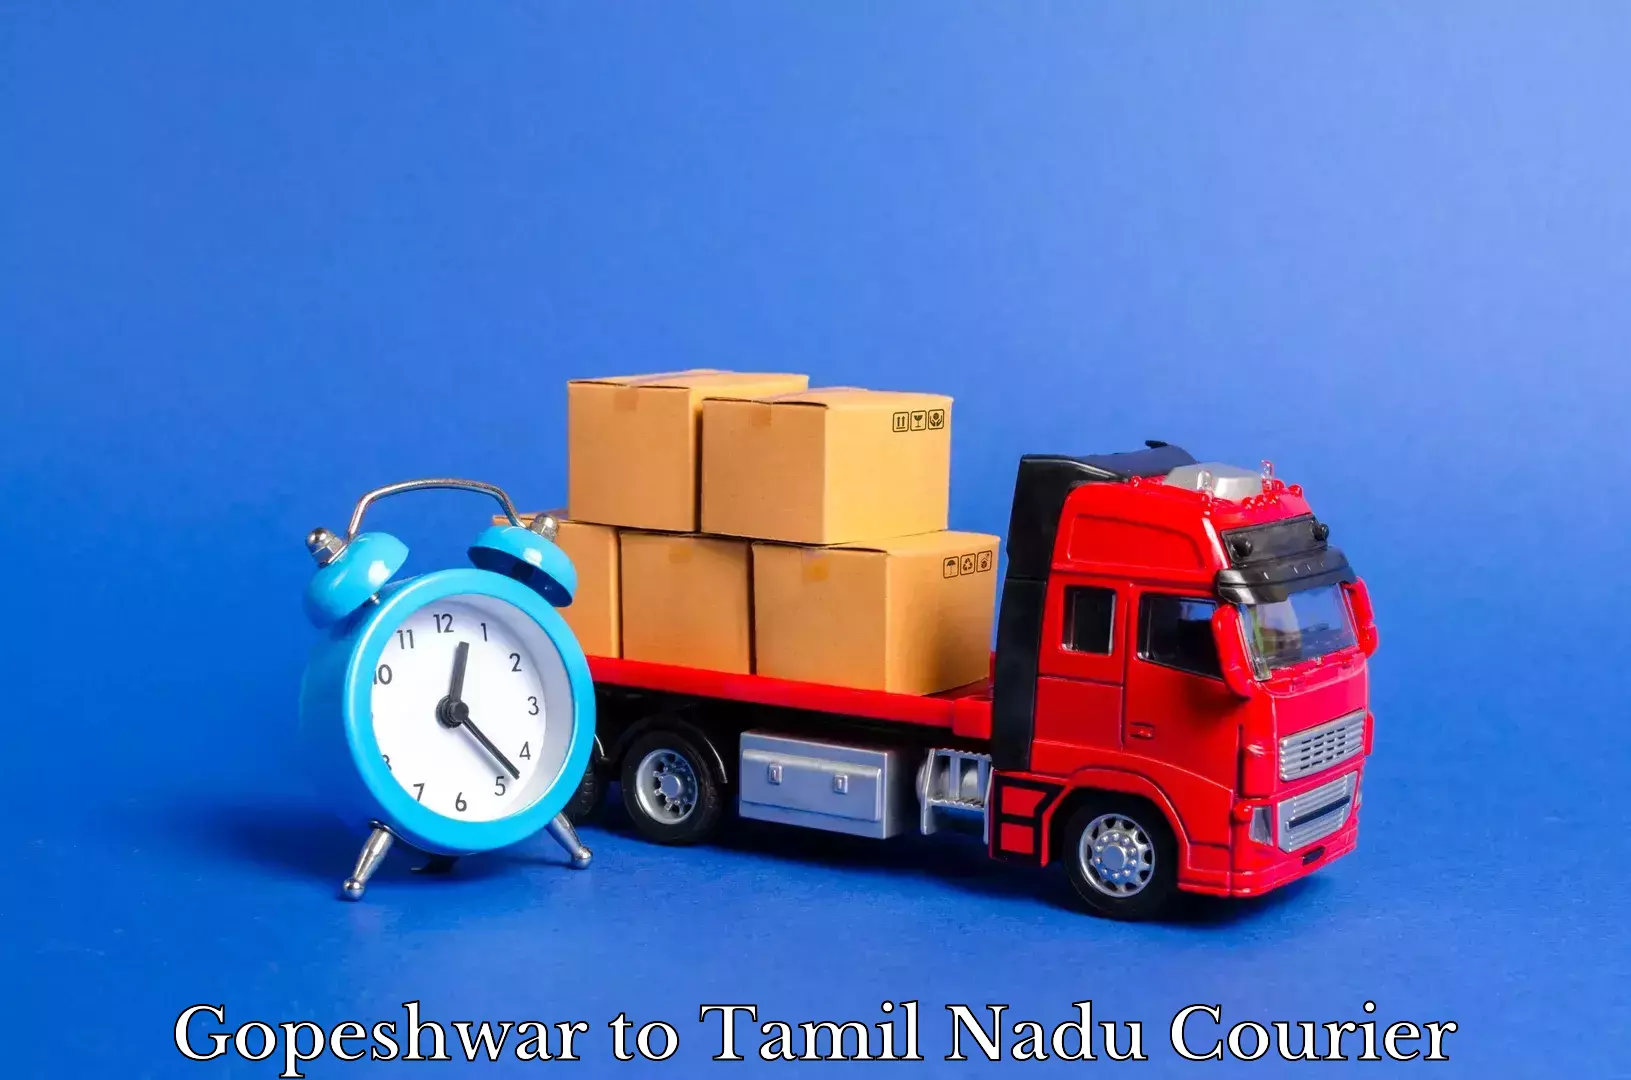 Reliable furniture transport Gopeshwar to Sri Ramachandra Institute of Higher Education and Research Chennai